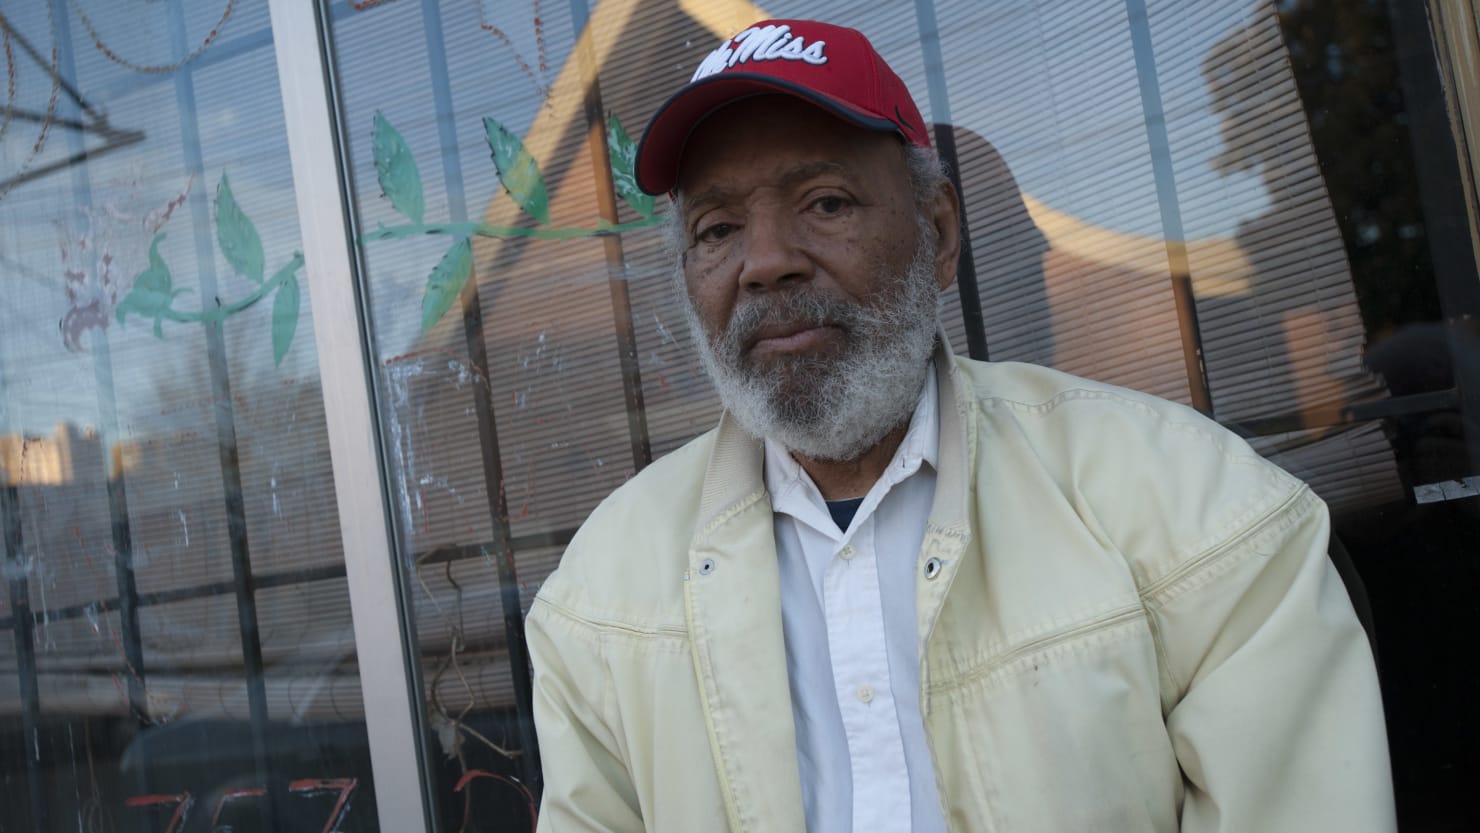 Civil Rights Giant James Meredith Suffers Fall at 90th Birthday Party - The Daily Beast